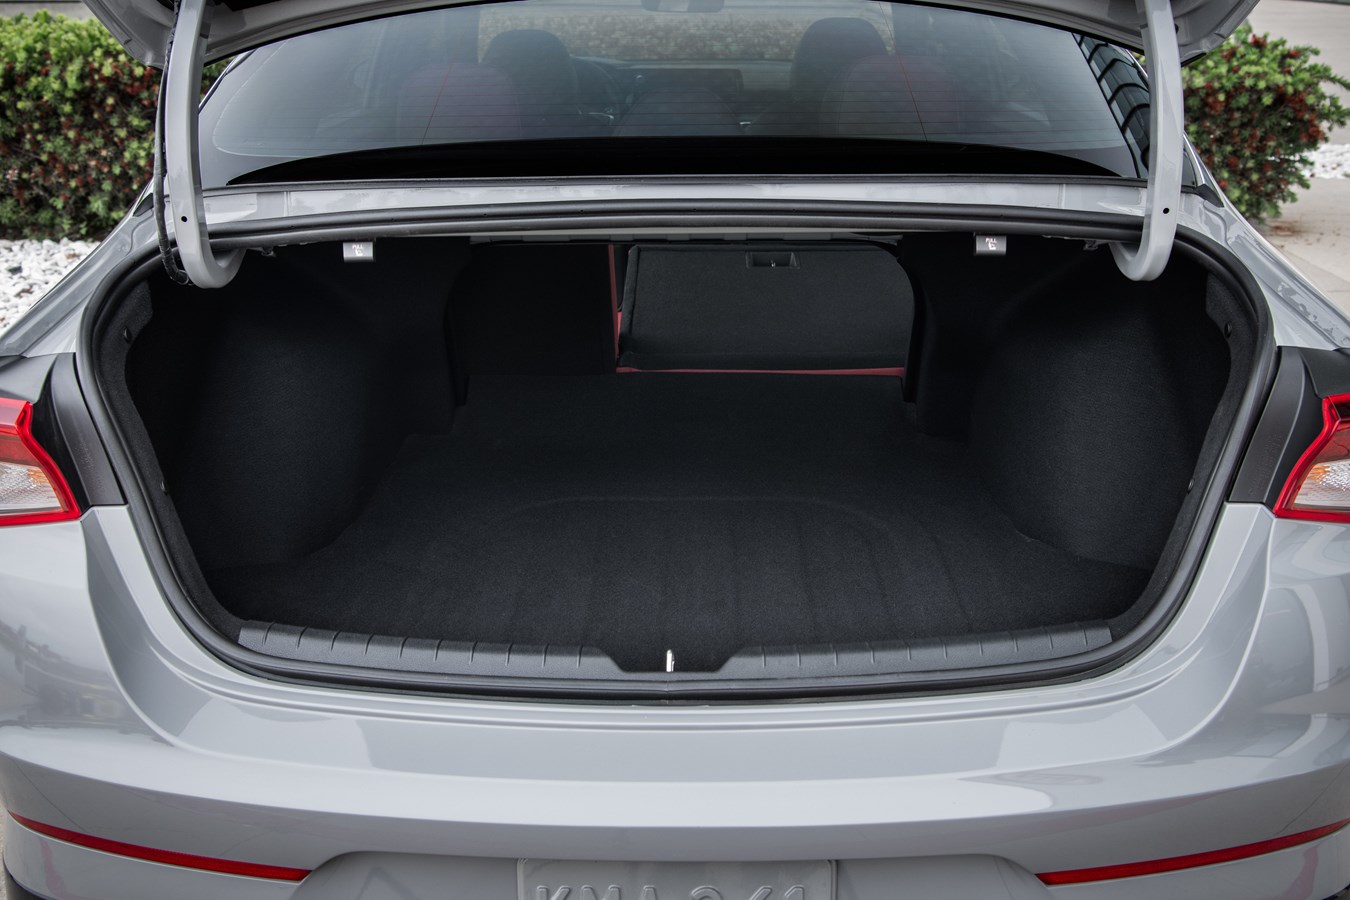 2021 K5 Trunk space